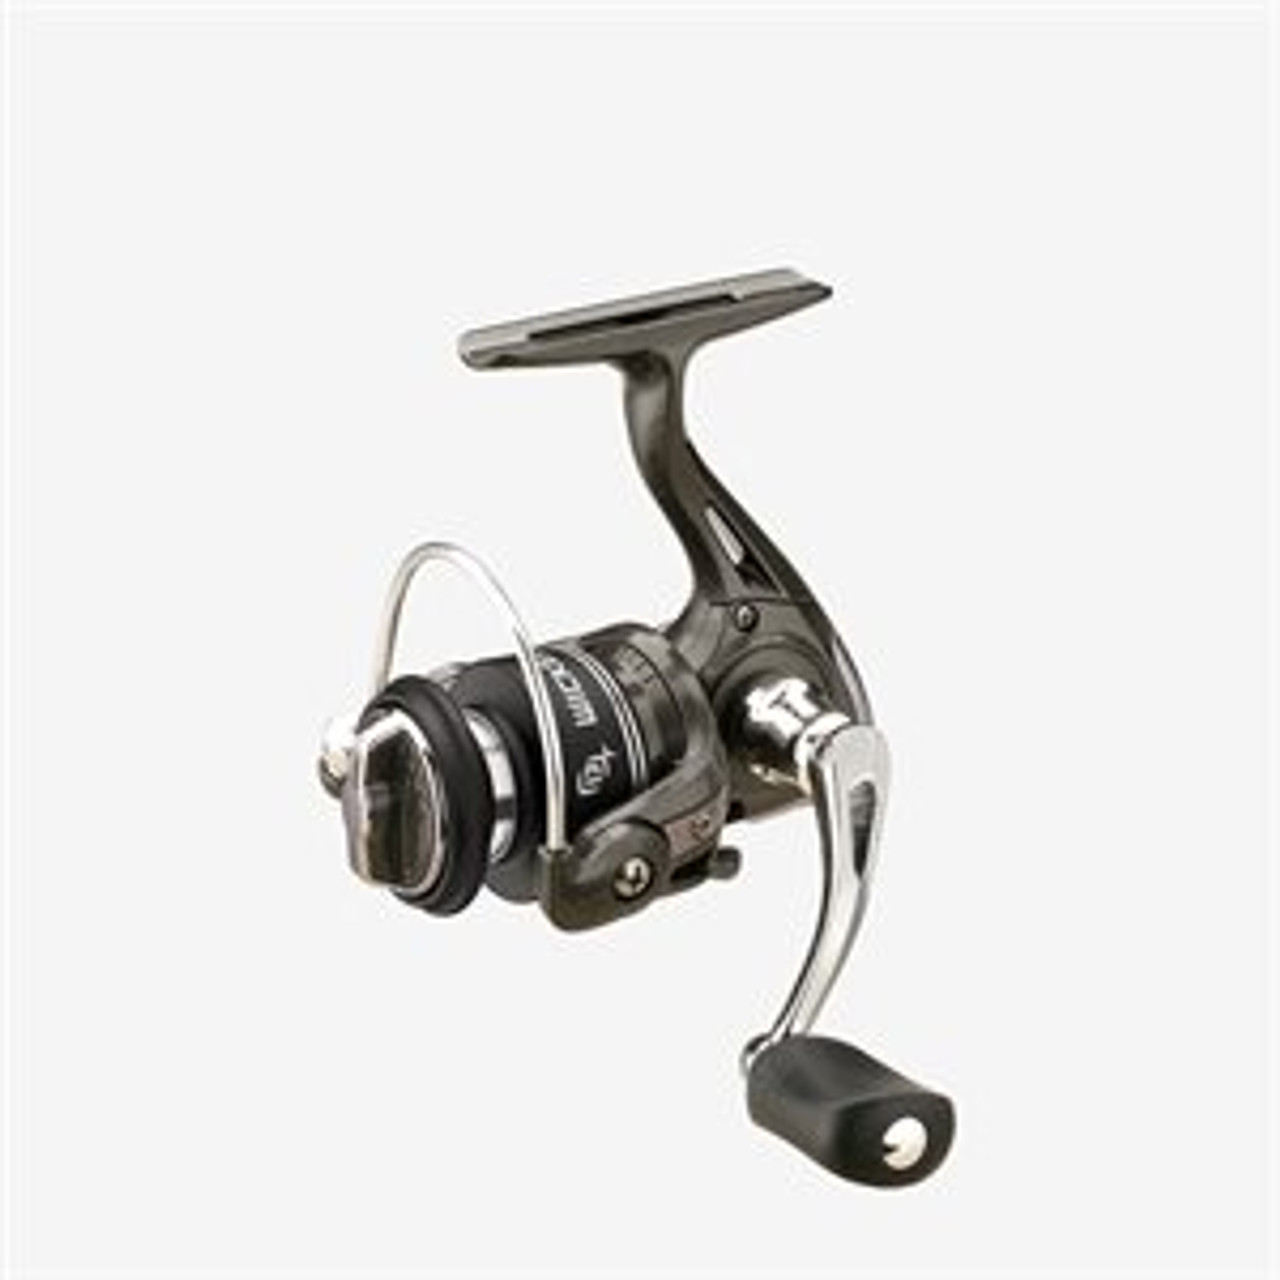 13 Fishing Wicked Ice Spinning Reel - GoIceFish